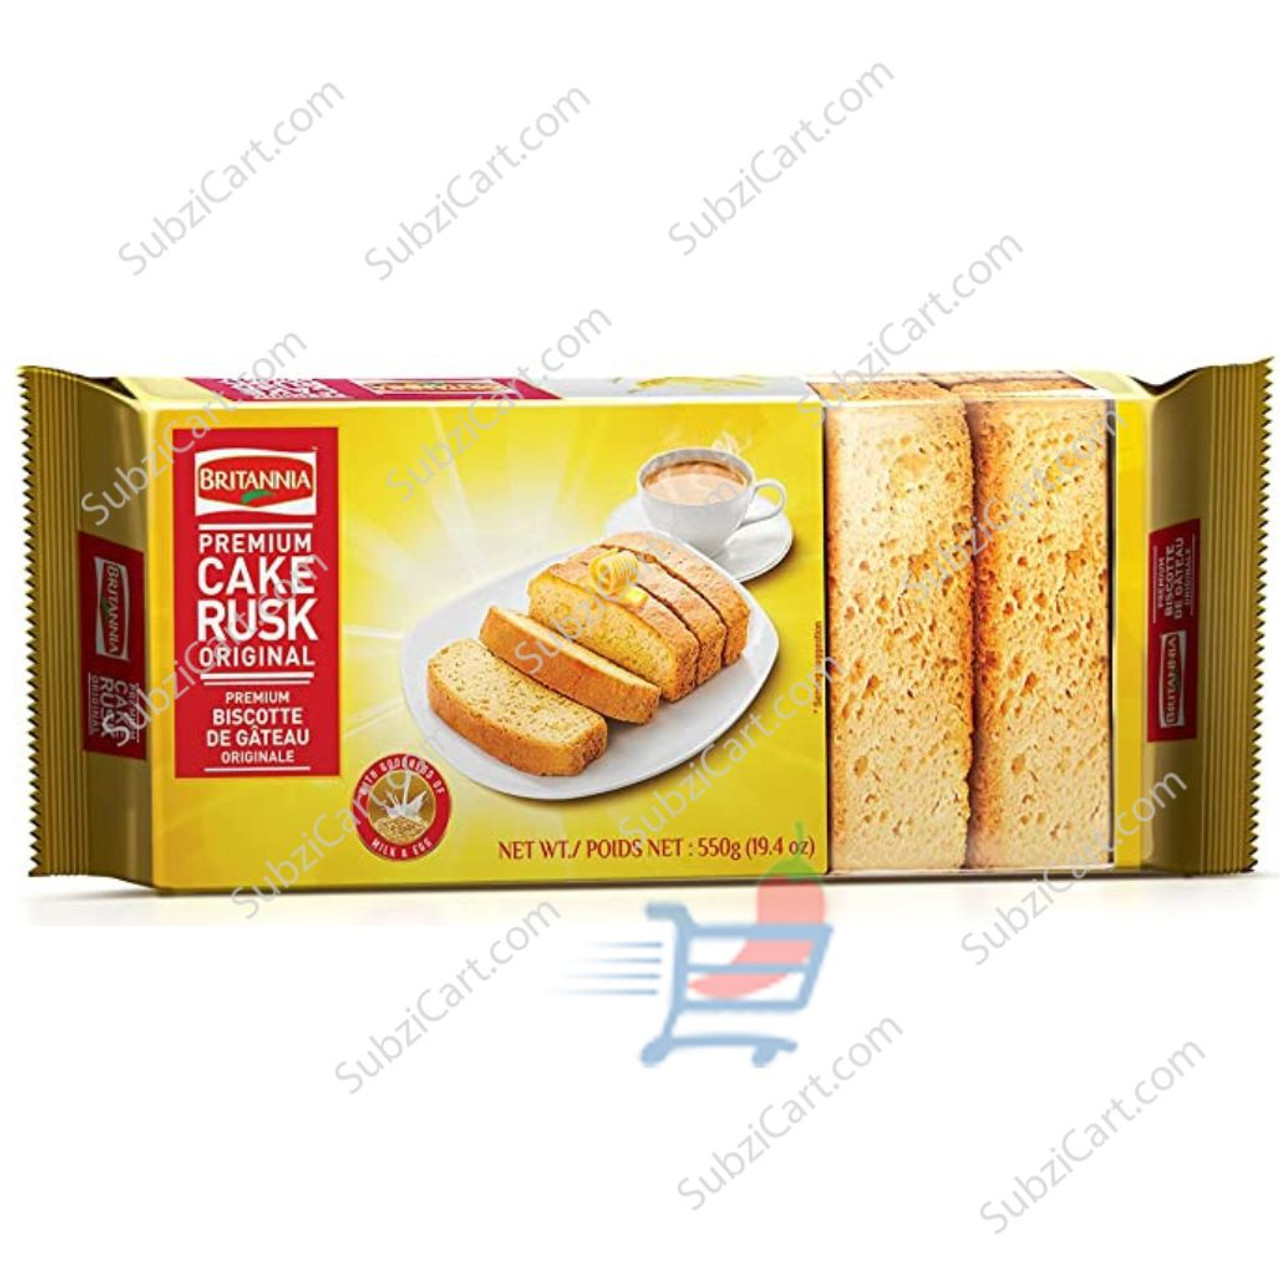 Britannia Toastea Eggless Rusk Cake 19.40oz (550g) - Delightfully Smooth,  Soft, and Delicious Cake - Breakfast & Tea Time Snacks - Suitable for  Vegetarians (Pack of 3) -